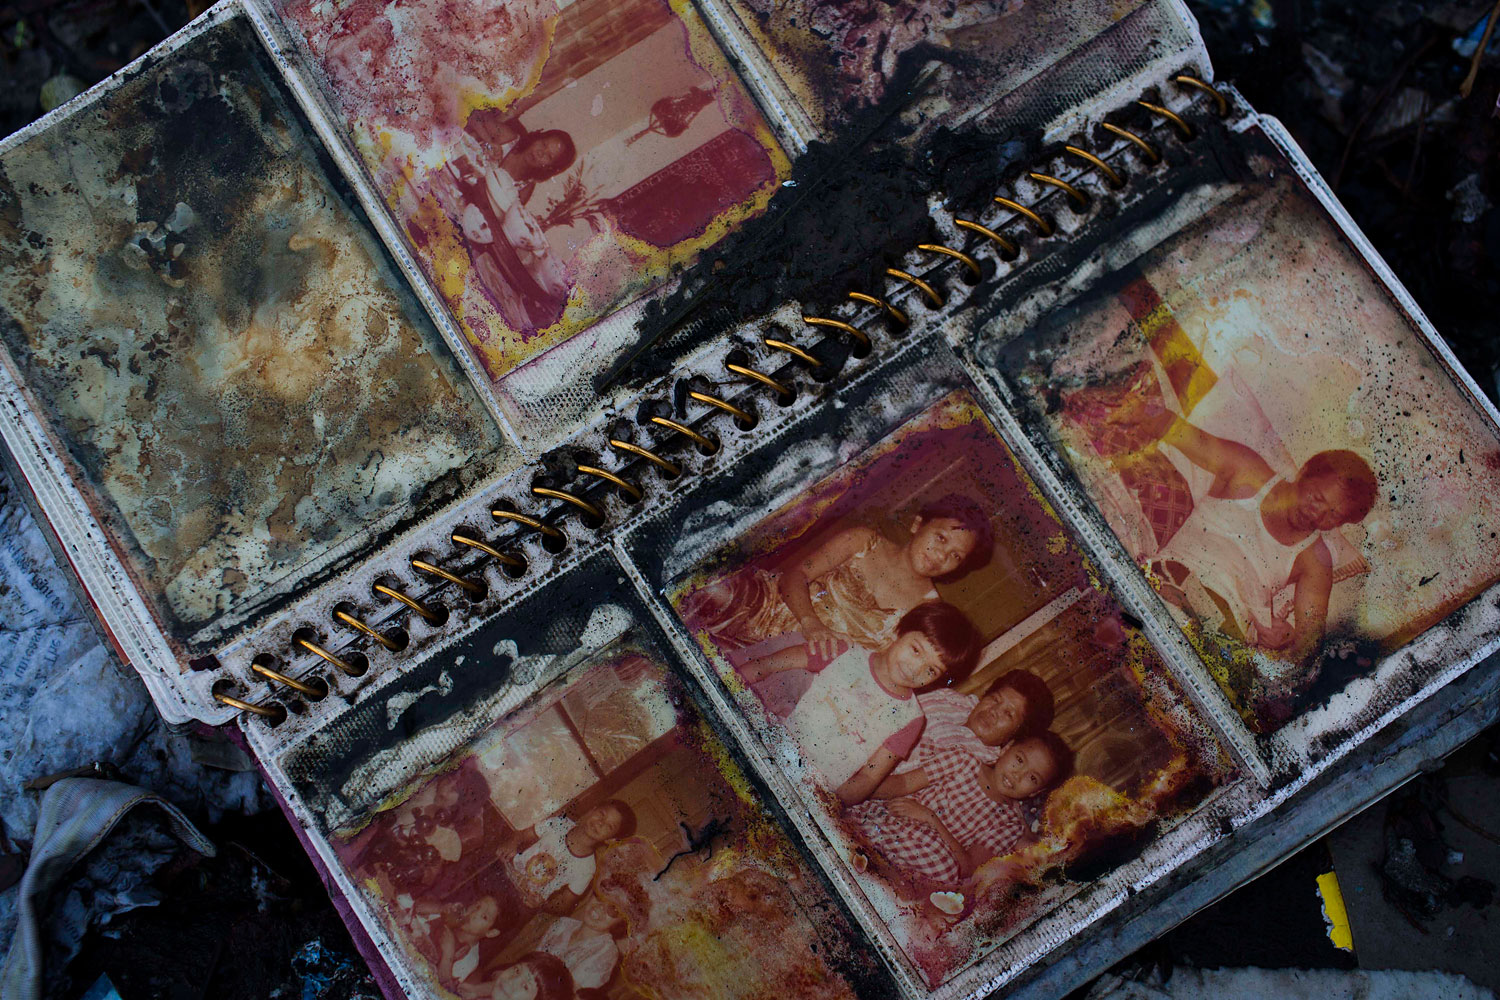 A photo album lies in the rubble in a neighborhood destroyed by Typhoon Haiyan in Tacloban, Philippines on November 22, 2013.